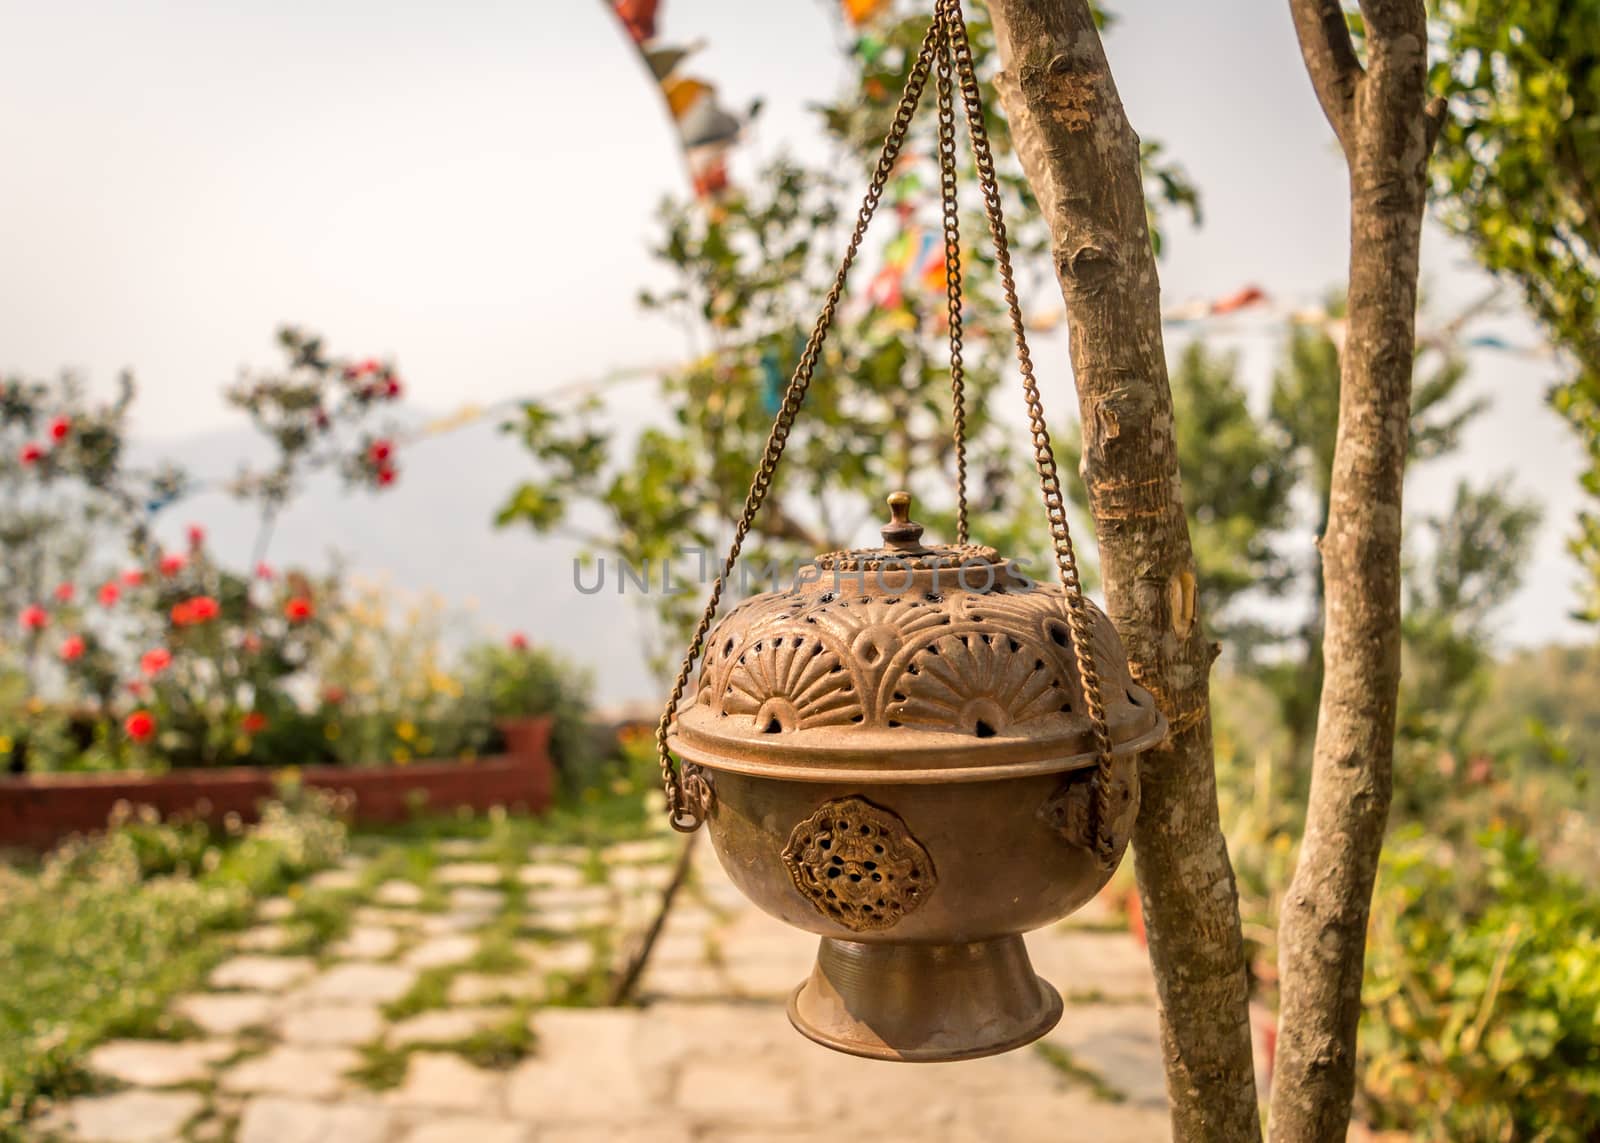 Metal Dhoop Batti Stand Hanging on a tree branch. This pot covered in a substance that is burned to produce a pleasant smell, especially as part of a religious ceremony.